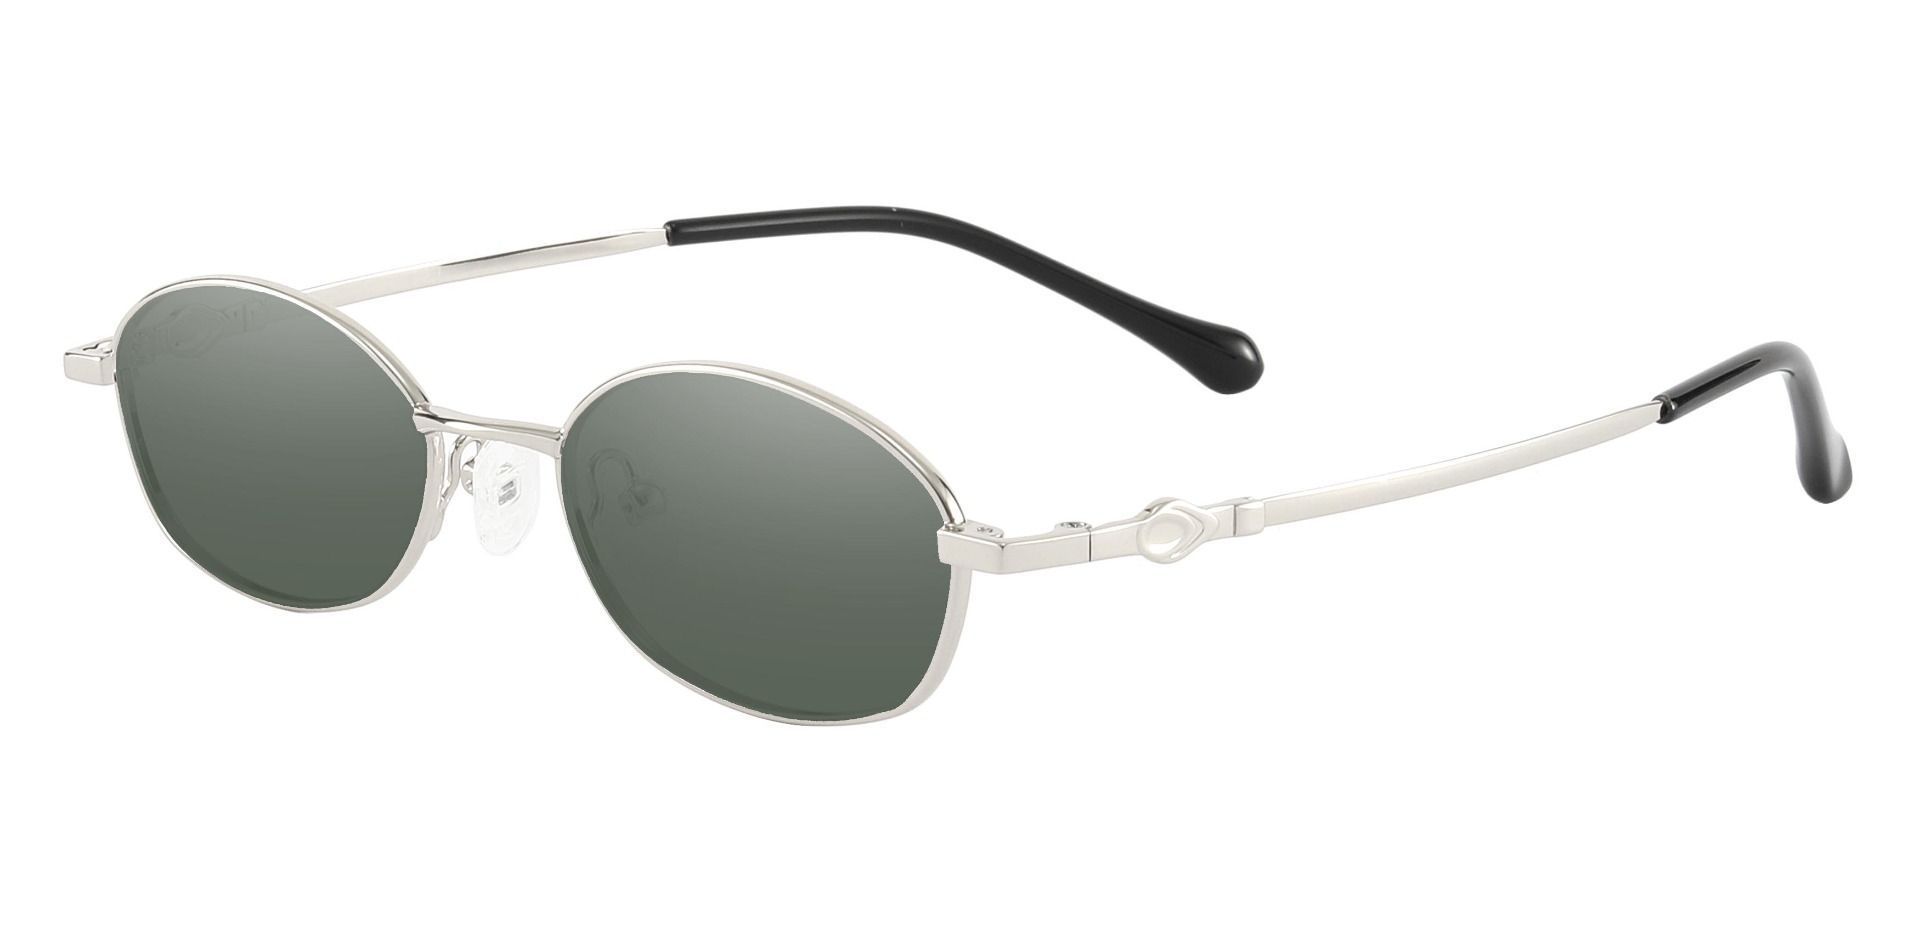 Fletcher Oval Non-Rx Sunglasses - Silver Frame With Green Lenses